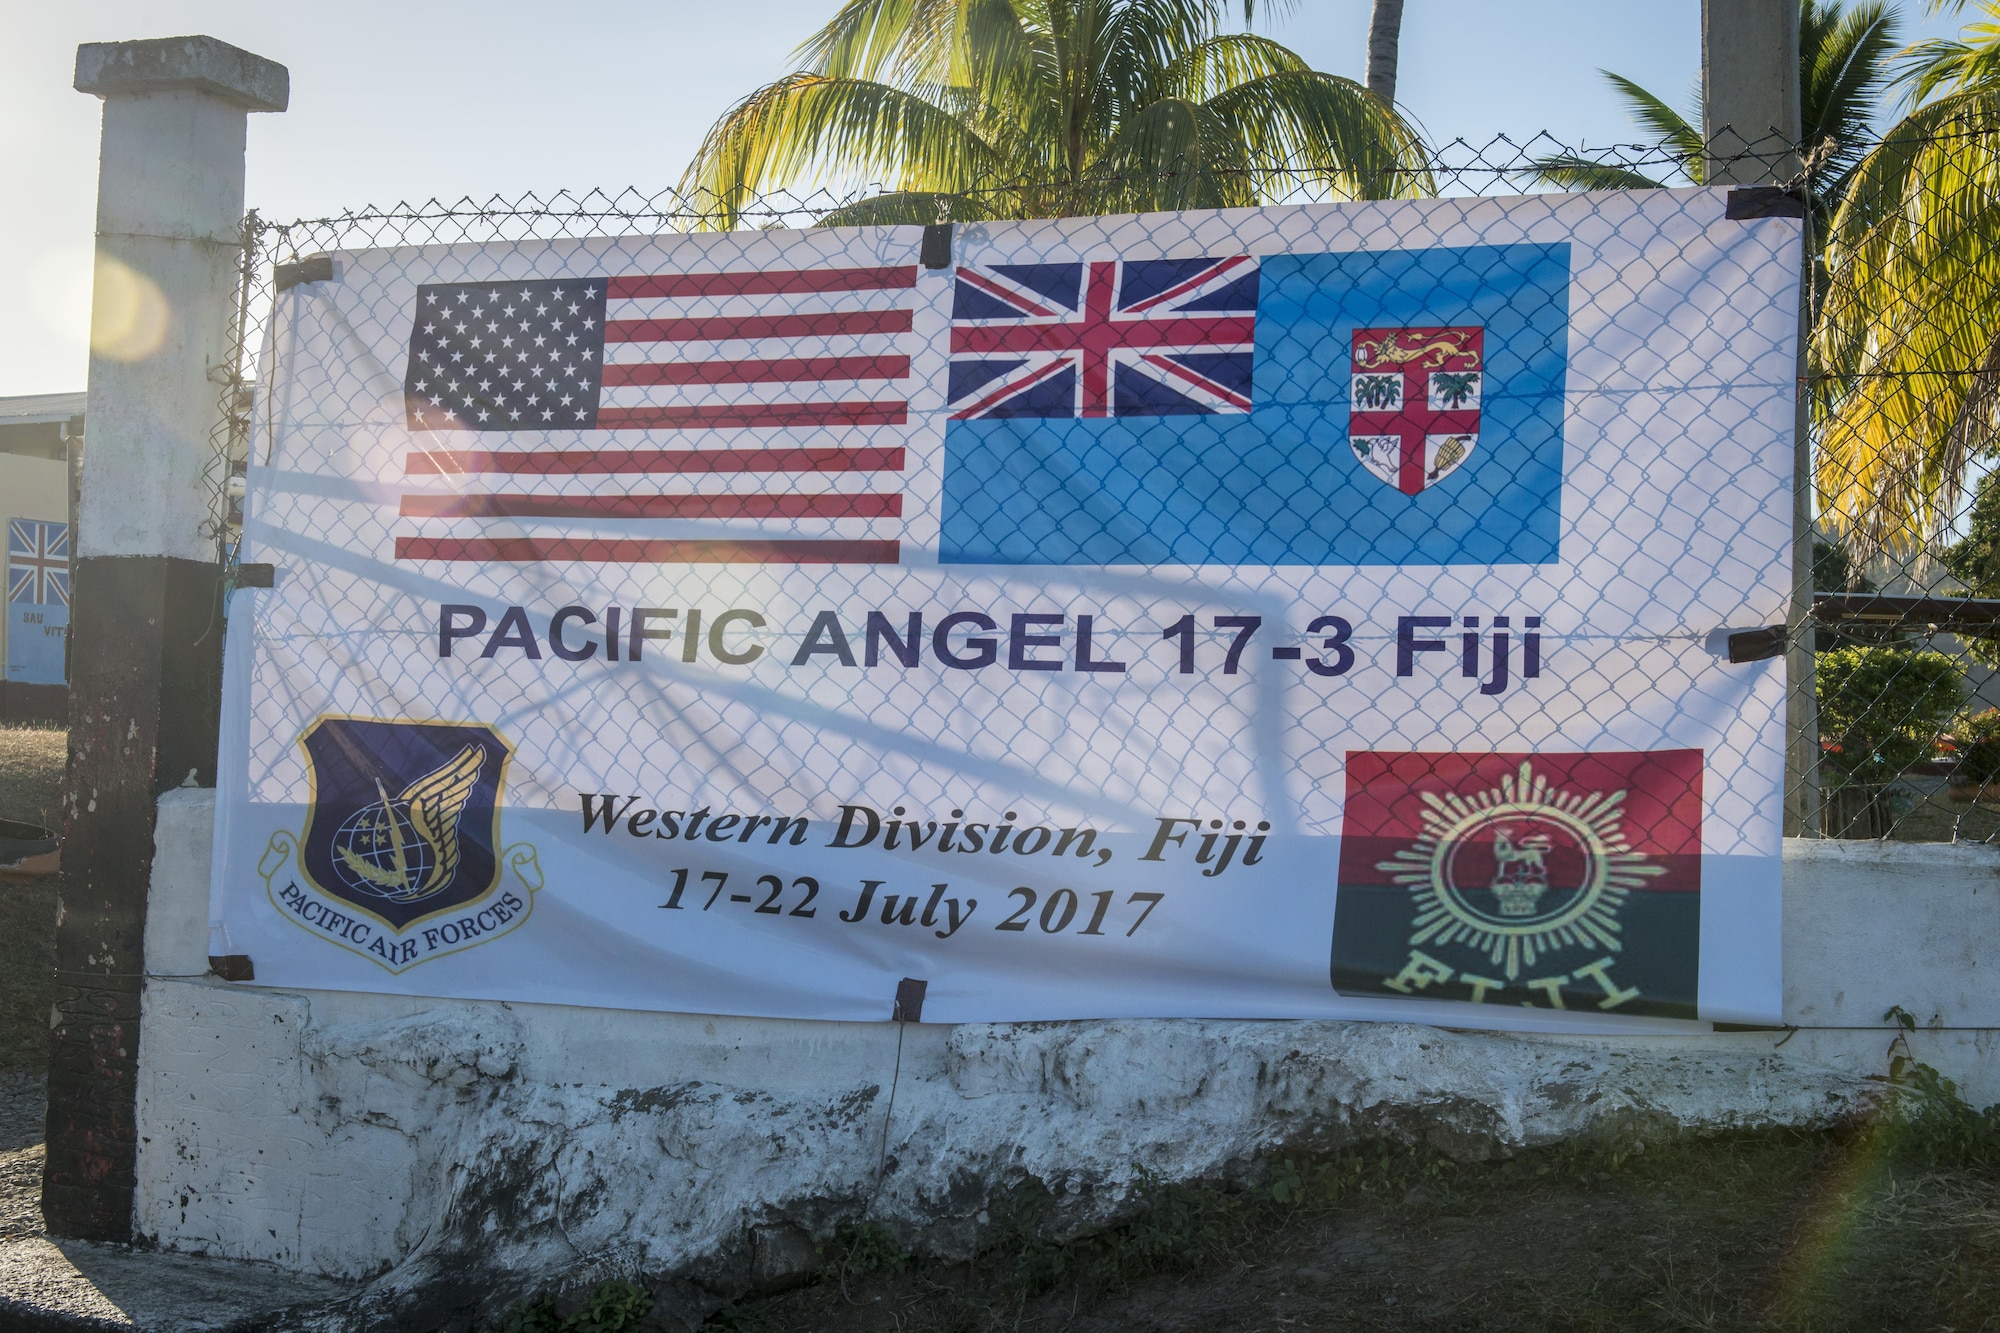 The Pacific Angel (PACANGEL) 17-3 banner sign waves in the wind as the sunsets at the Tagitagi Sangam School and Kindergarten in Tavua, Fiji, July 22, 2017. PACANGEL 17-3 built partnerships between the U.S., Fiji, and five regional nations including Australia, Vanuatu, Indonesia, the Philippines and France by conducting multilateral humanitarian assistance and civil military operations, promoting regional military-civilian-nongovernmental organization cooperation and interoperability. (U.S. Air Force photo/Tech. Sgt. Benjamin W. Stratton)